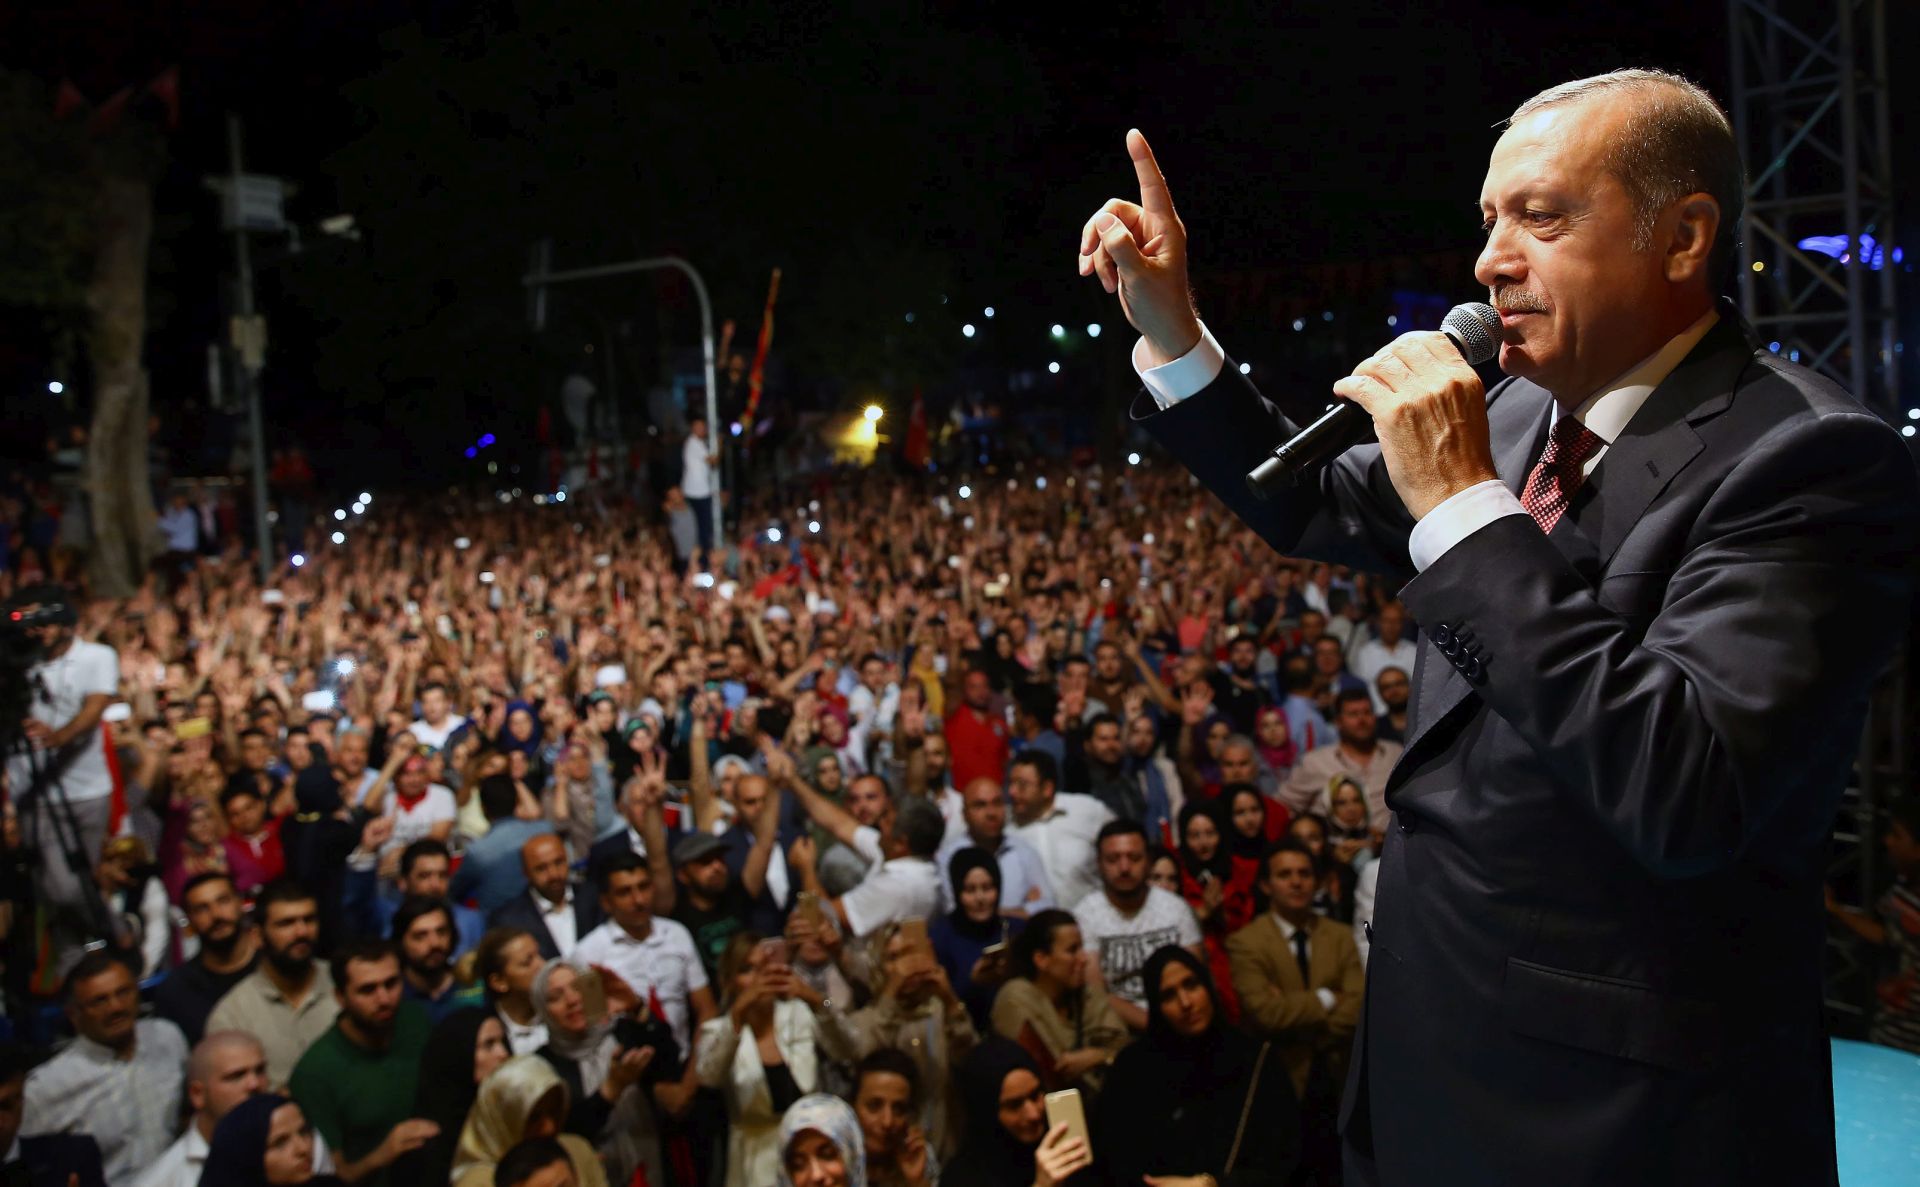 epa05431625 A handout picture provided by Turkish President Press office on 19 July 2016 shows, Turkish President Recep Tayyip Erdogan speaking during his rally in Istanbul, Turkey, midnight 18 July 2016. Turkish Prime Minister Yildirim reportedly said that the Turkish military was involved in an attempted coup d'etat. Turkish President Recep Tayyip Erdogan has denounced the coup attempt as an 'act of treason' and insisted his government remains in charge. Some 104 coup plotters were killed, 90 people - 41 of them police and 47 are civilians - 'fell martrys', after an attempt to bring down the Turkish government, the acting army chief General Umit Dundar said in a televised appearance.who were killed in a coup attempt on 16 July, during the funeral, in Istanbul, Turkey, 17 July 2016. Turkish Prime Minister Yildirim reportedly said that the Turkish military was involved in an attempted coup d'etat. Turkish President Recep Tayyip Erdogan has denounced the coup attempt as an 'act of treason' and insisted his government remains in charge. Some 104 coup plotters were killed, 90 people - 41 of them police and 47 are civilians - 'fell martrys', after an attempt to bring down the Turkish government, the acting army chief General Umit Dundar said in a televised appearance.  EPA/TURKISH PRESIDENTAL PRESS OFFICE / HANDOUT  HANDOUT EDITORIAL USE ONLY/NO SALES